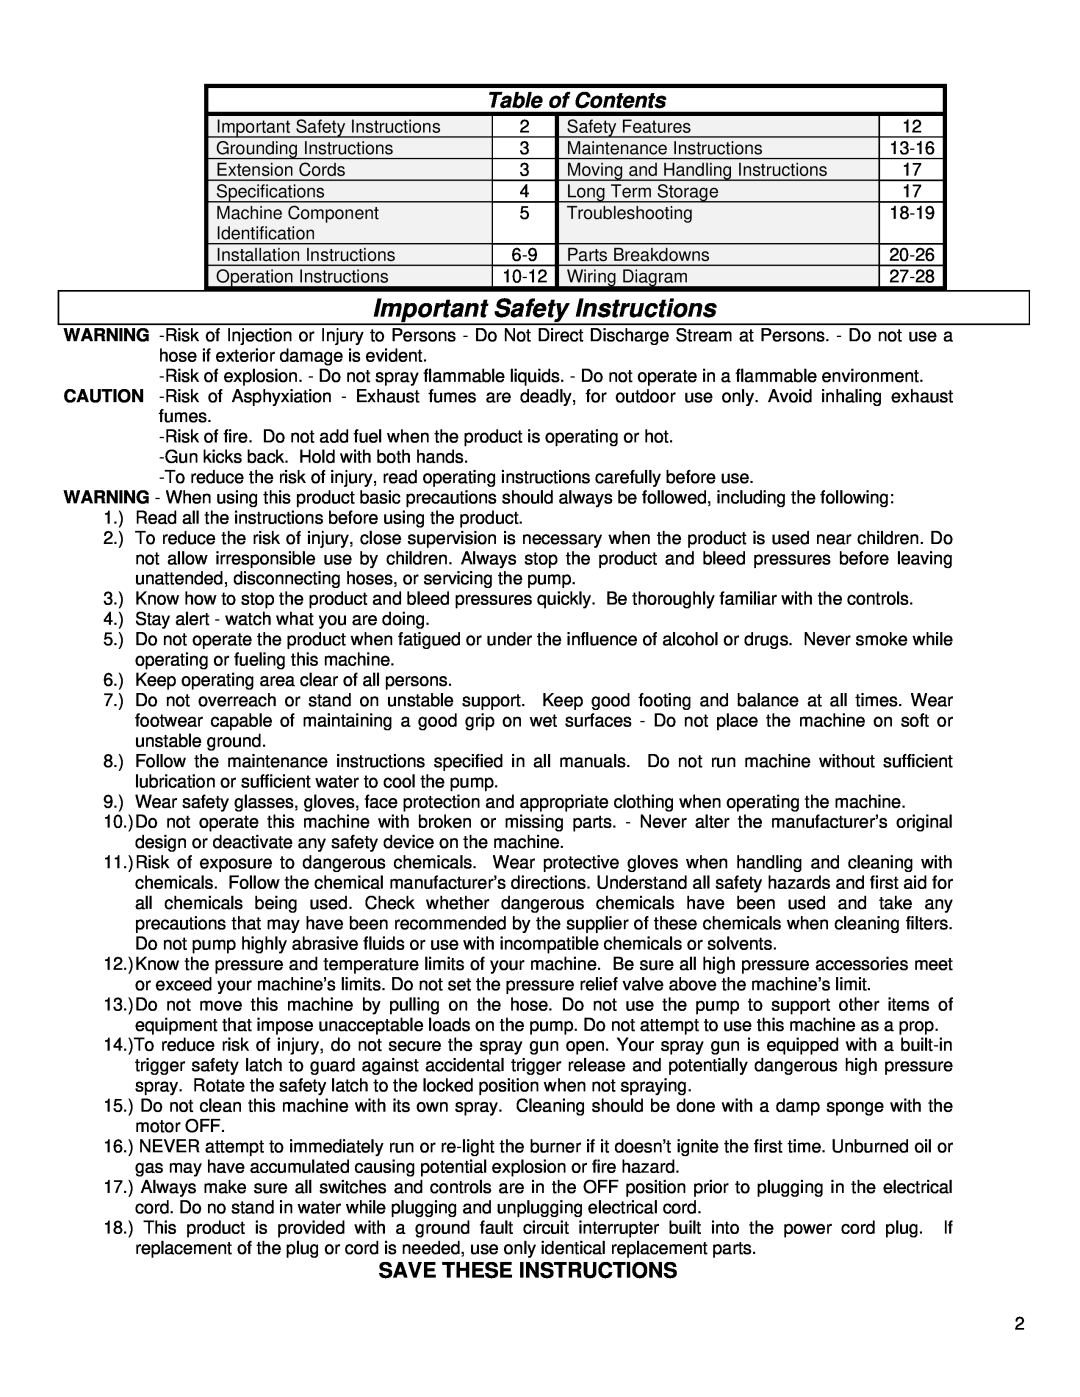 North Star MHOTPWR specifications Important Safety Instructions, Save These Instructions, Table of Contents 